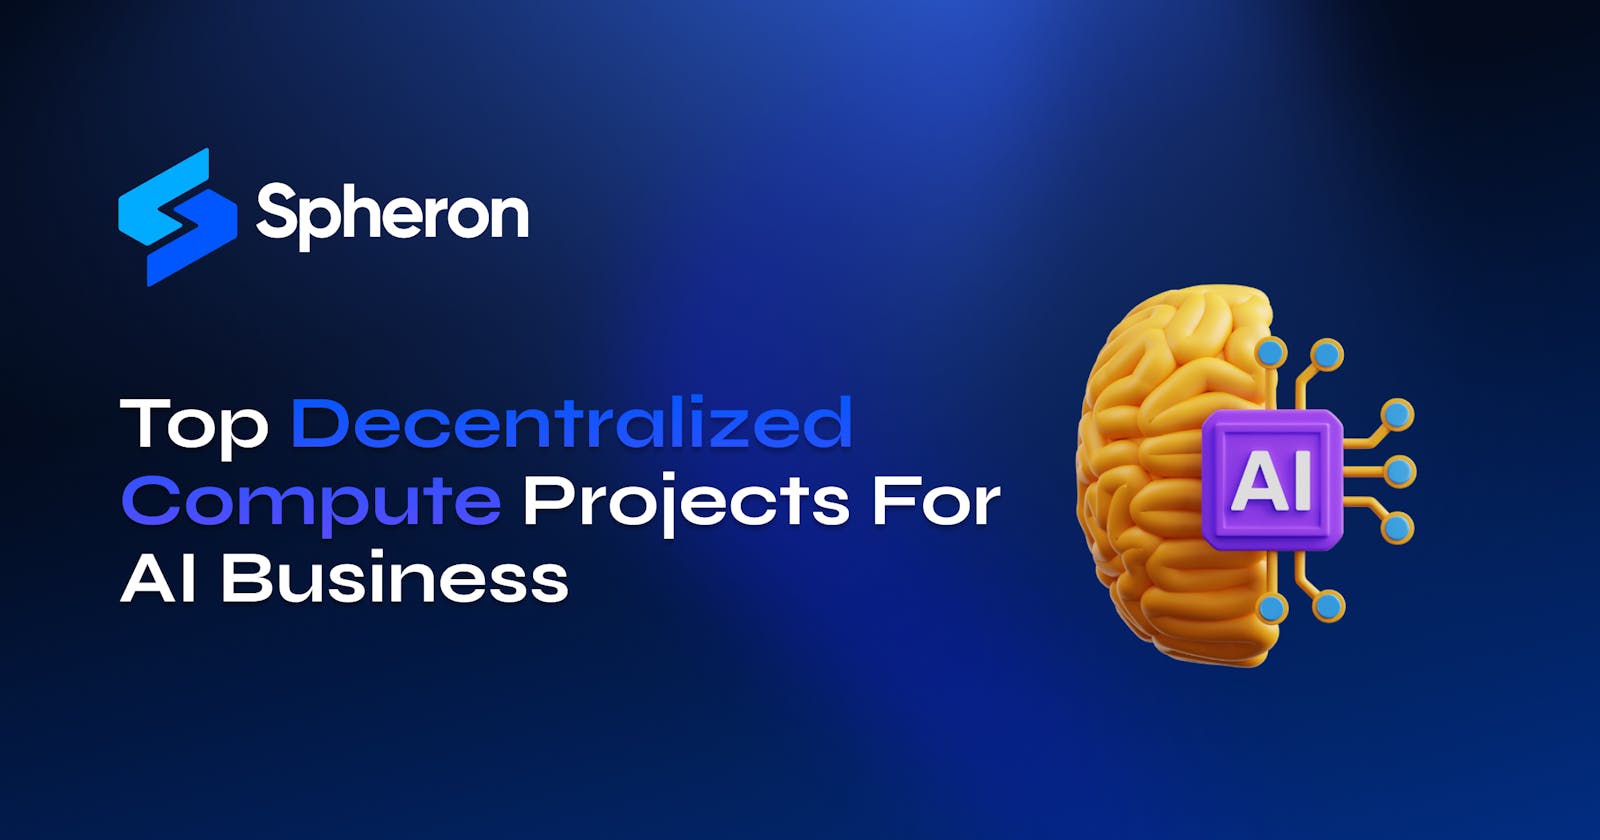 Top Decentralized Compute Projects For AI Business